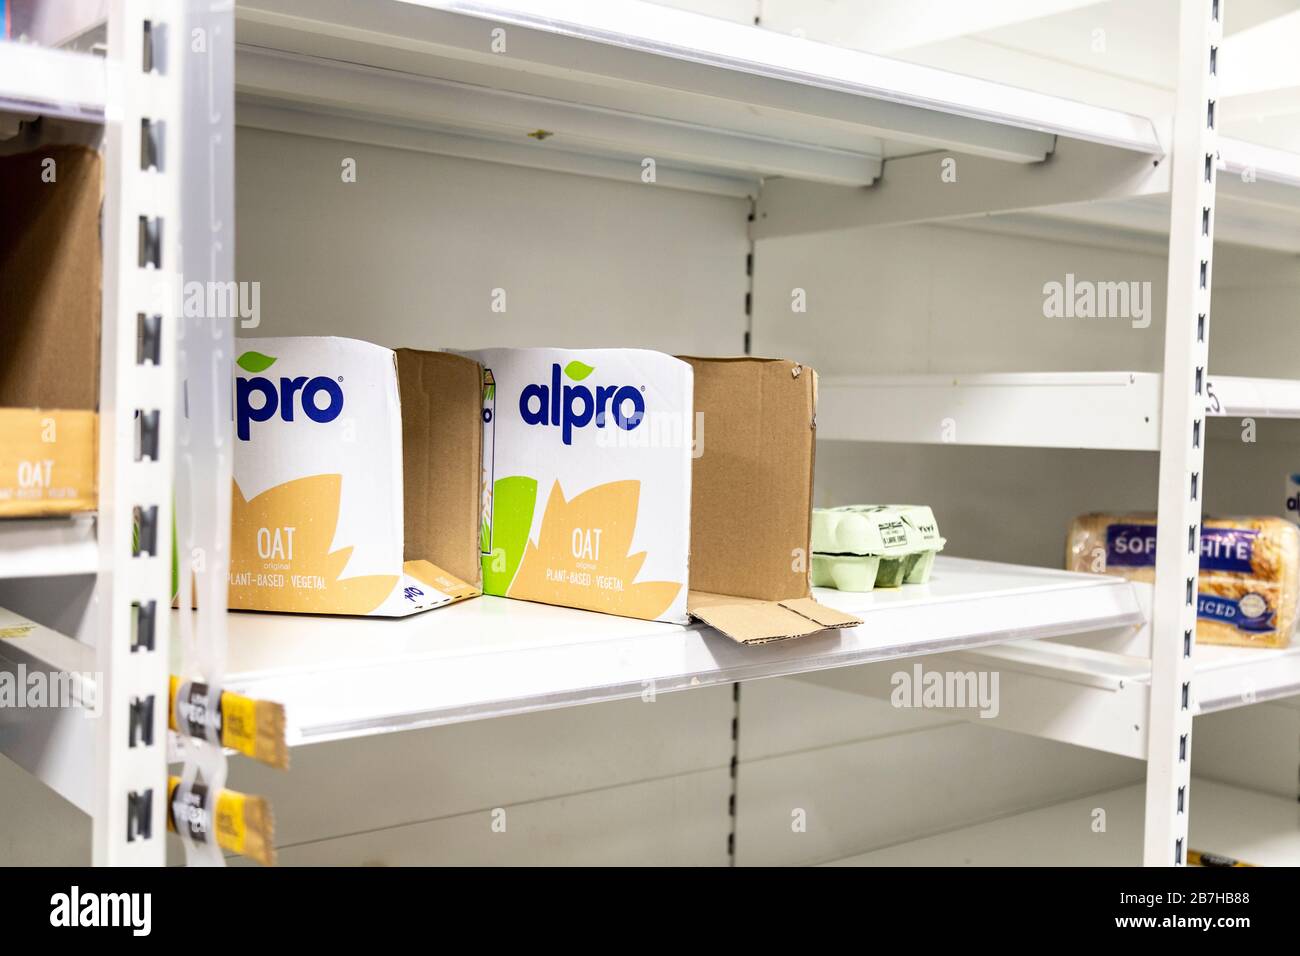 16 March 2020 - London, UK - Empty supermarket shelves at ASDA Stepney as people panic buy to stock up during the Coronavirus outbreak, empty boxes of longlife oat milk Stock Photo